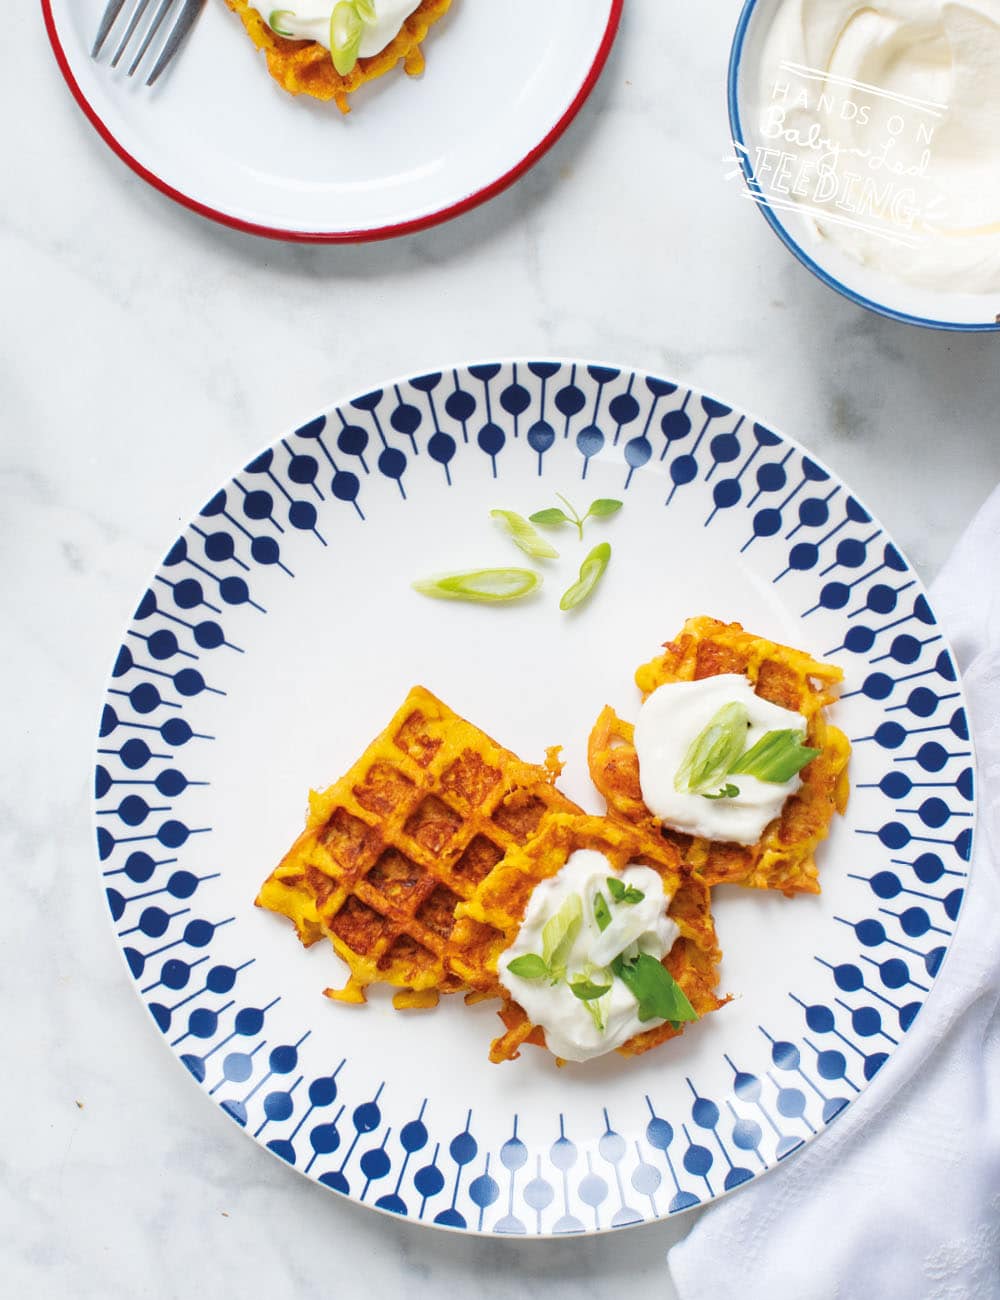 Baby Led weaning Carrot and Cheese Waffles Recipe Images5